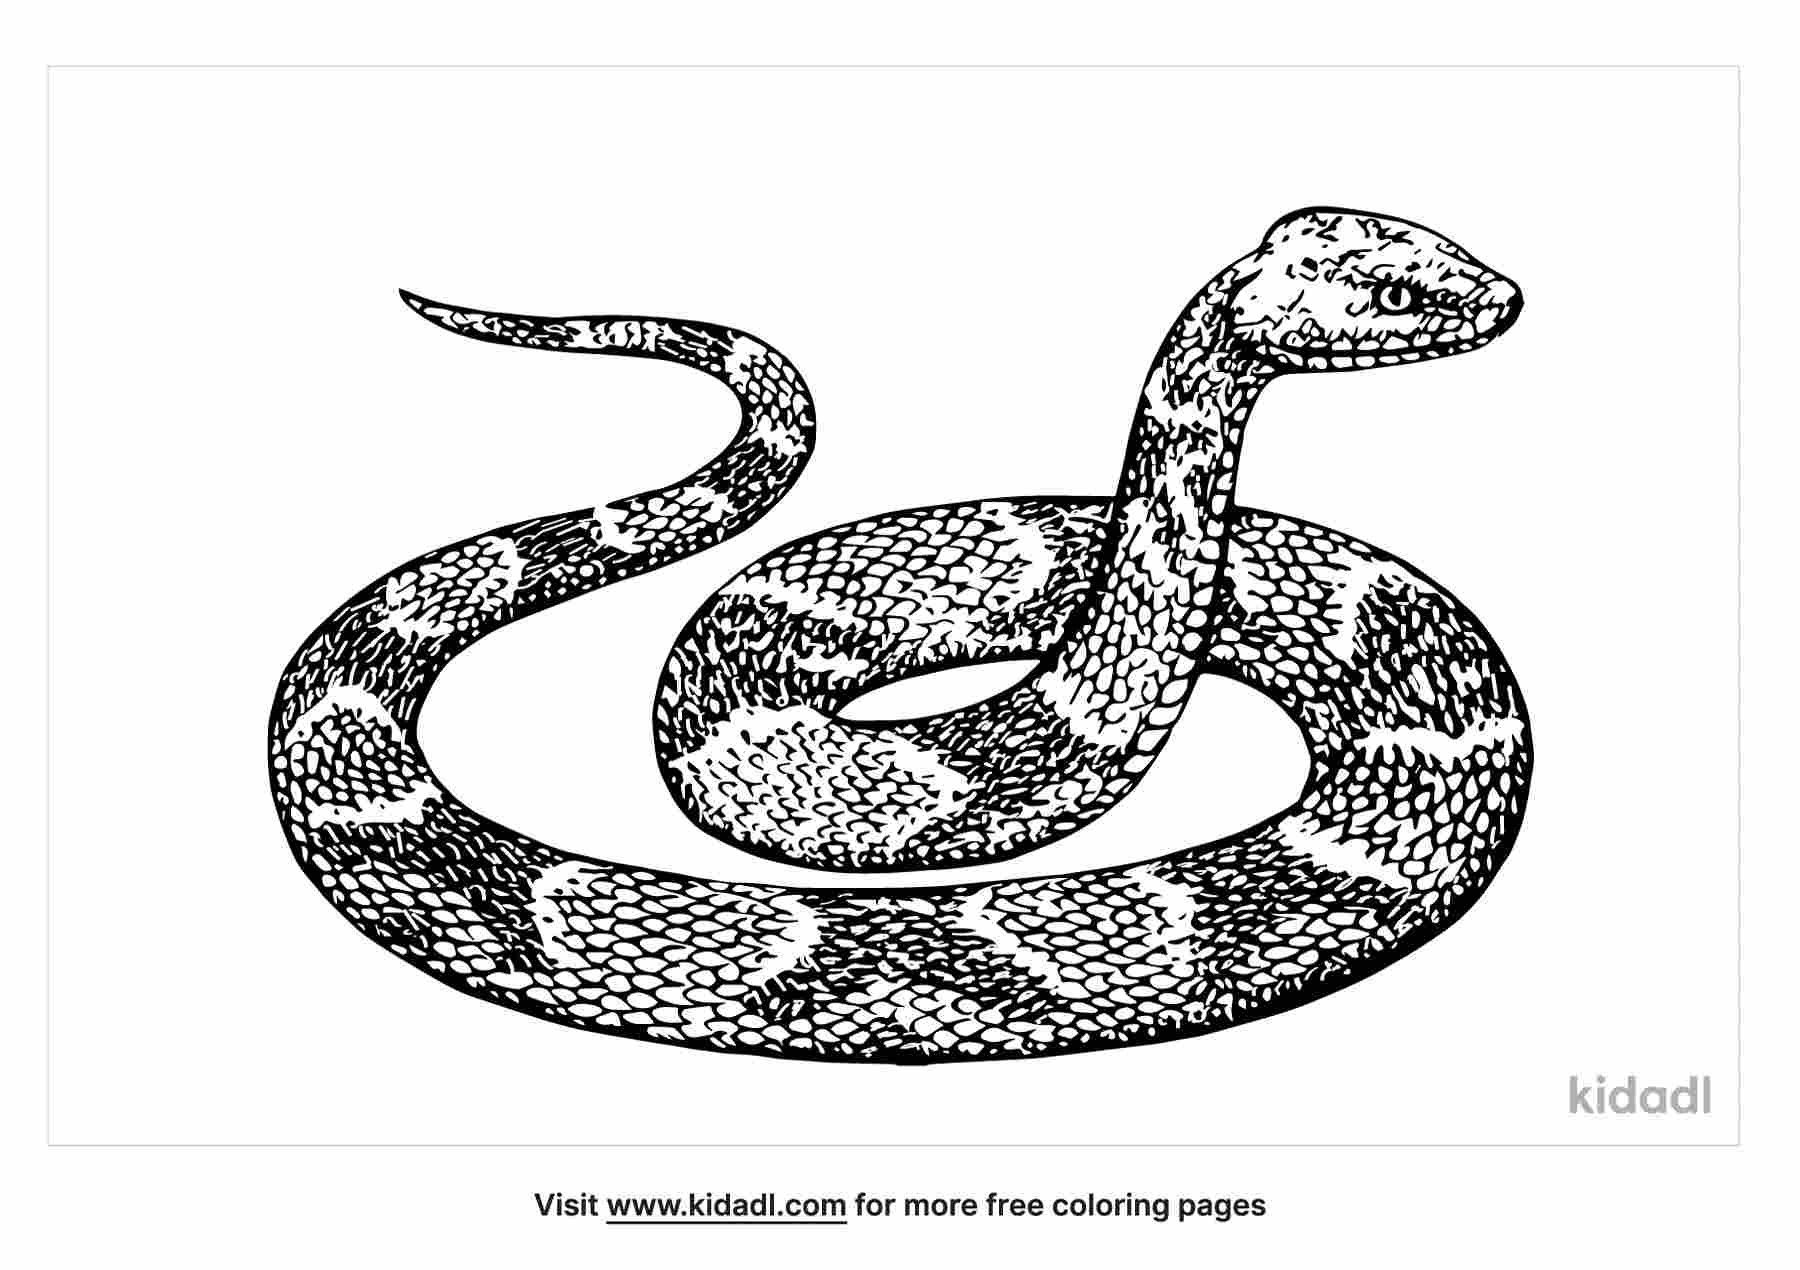 Download this python coloring page.